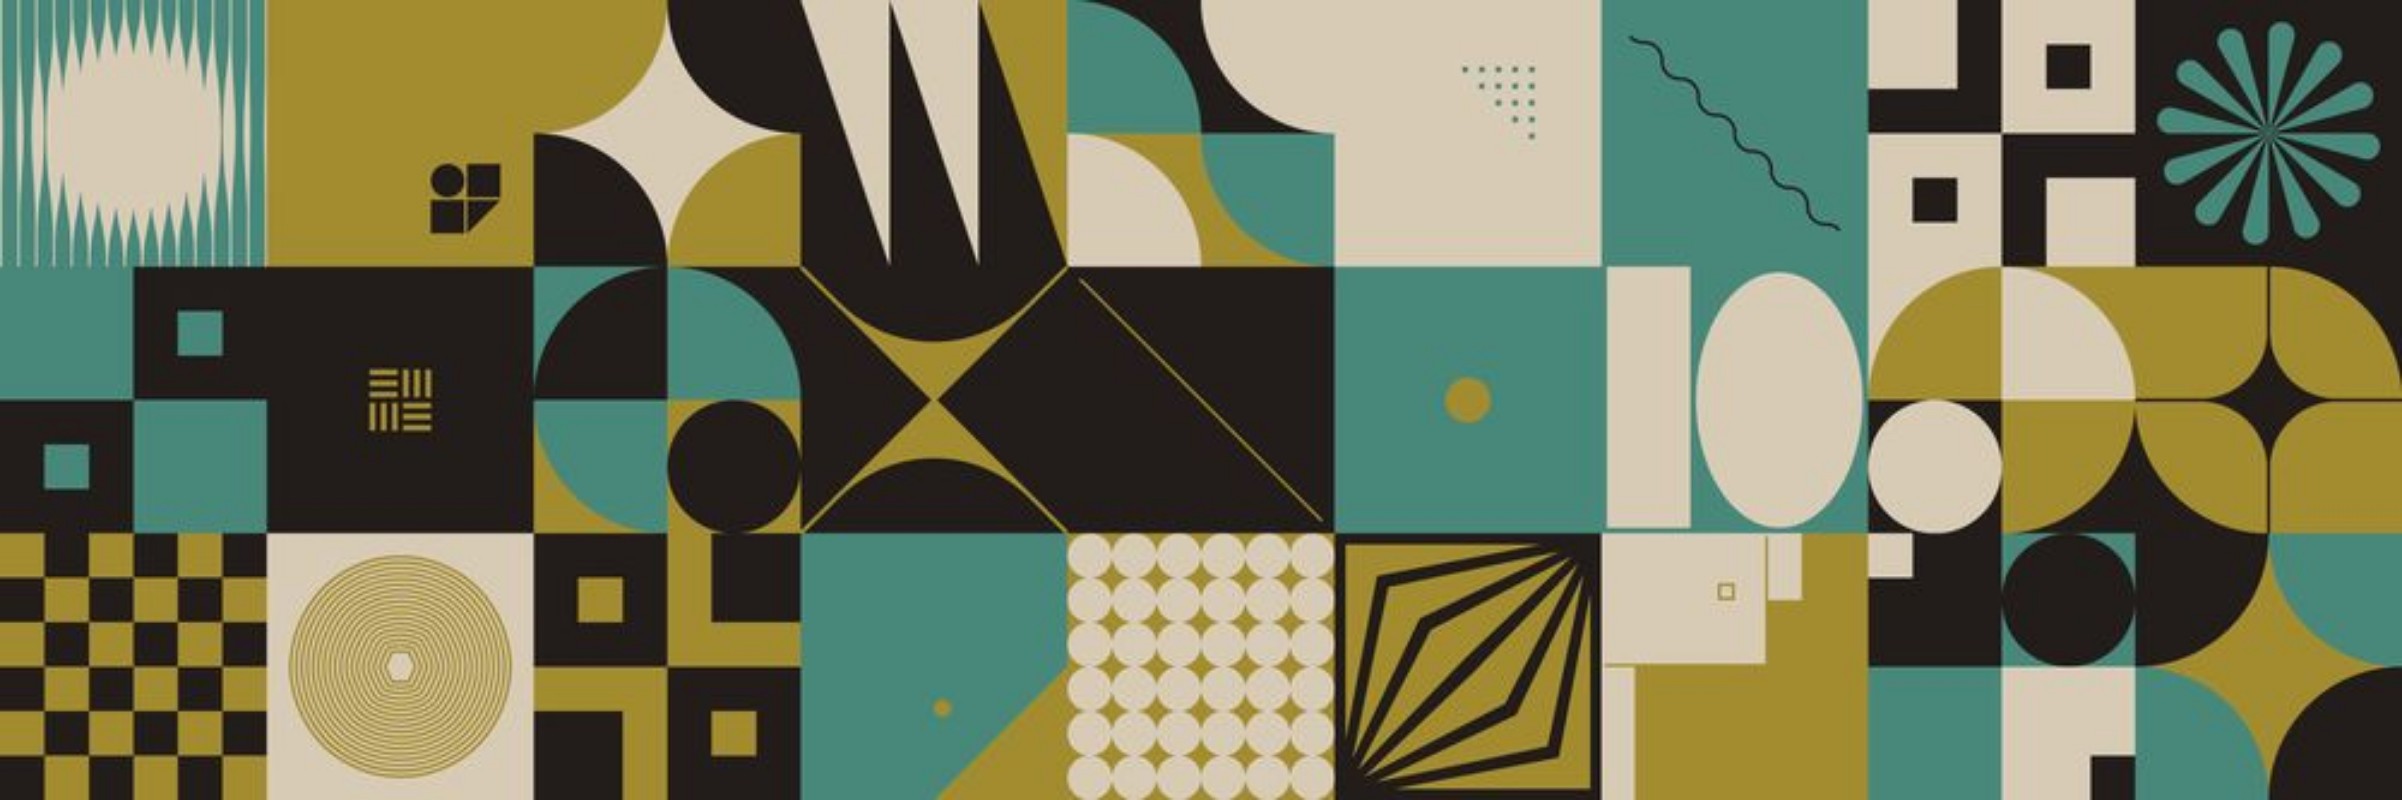 Image de Abstract Geometric Shapes